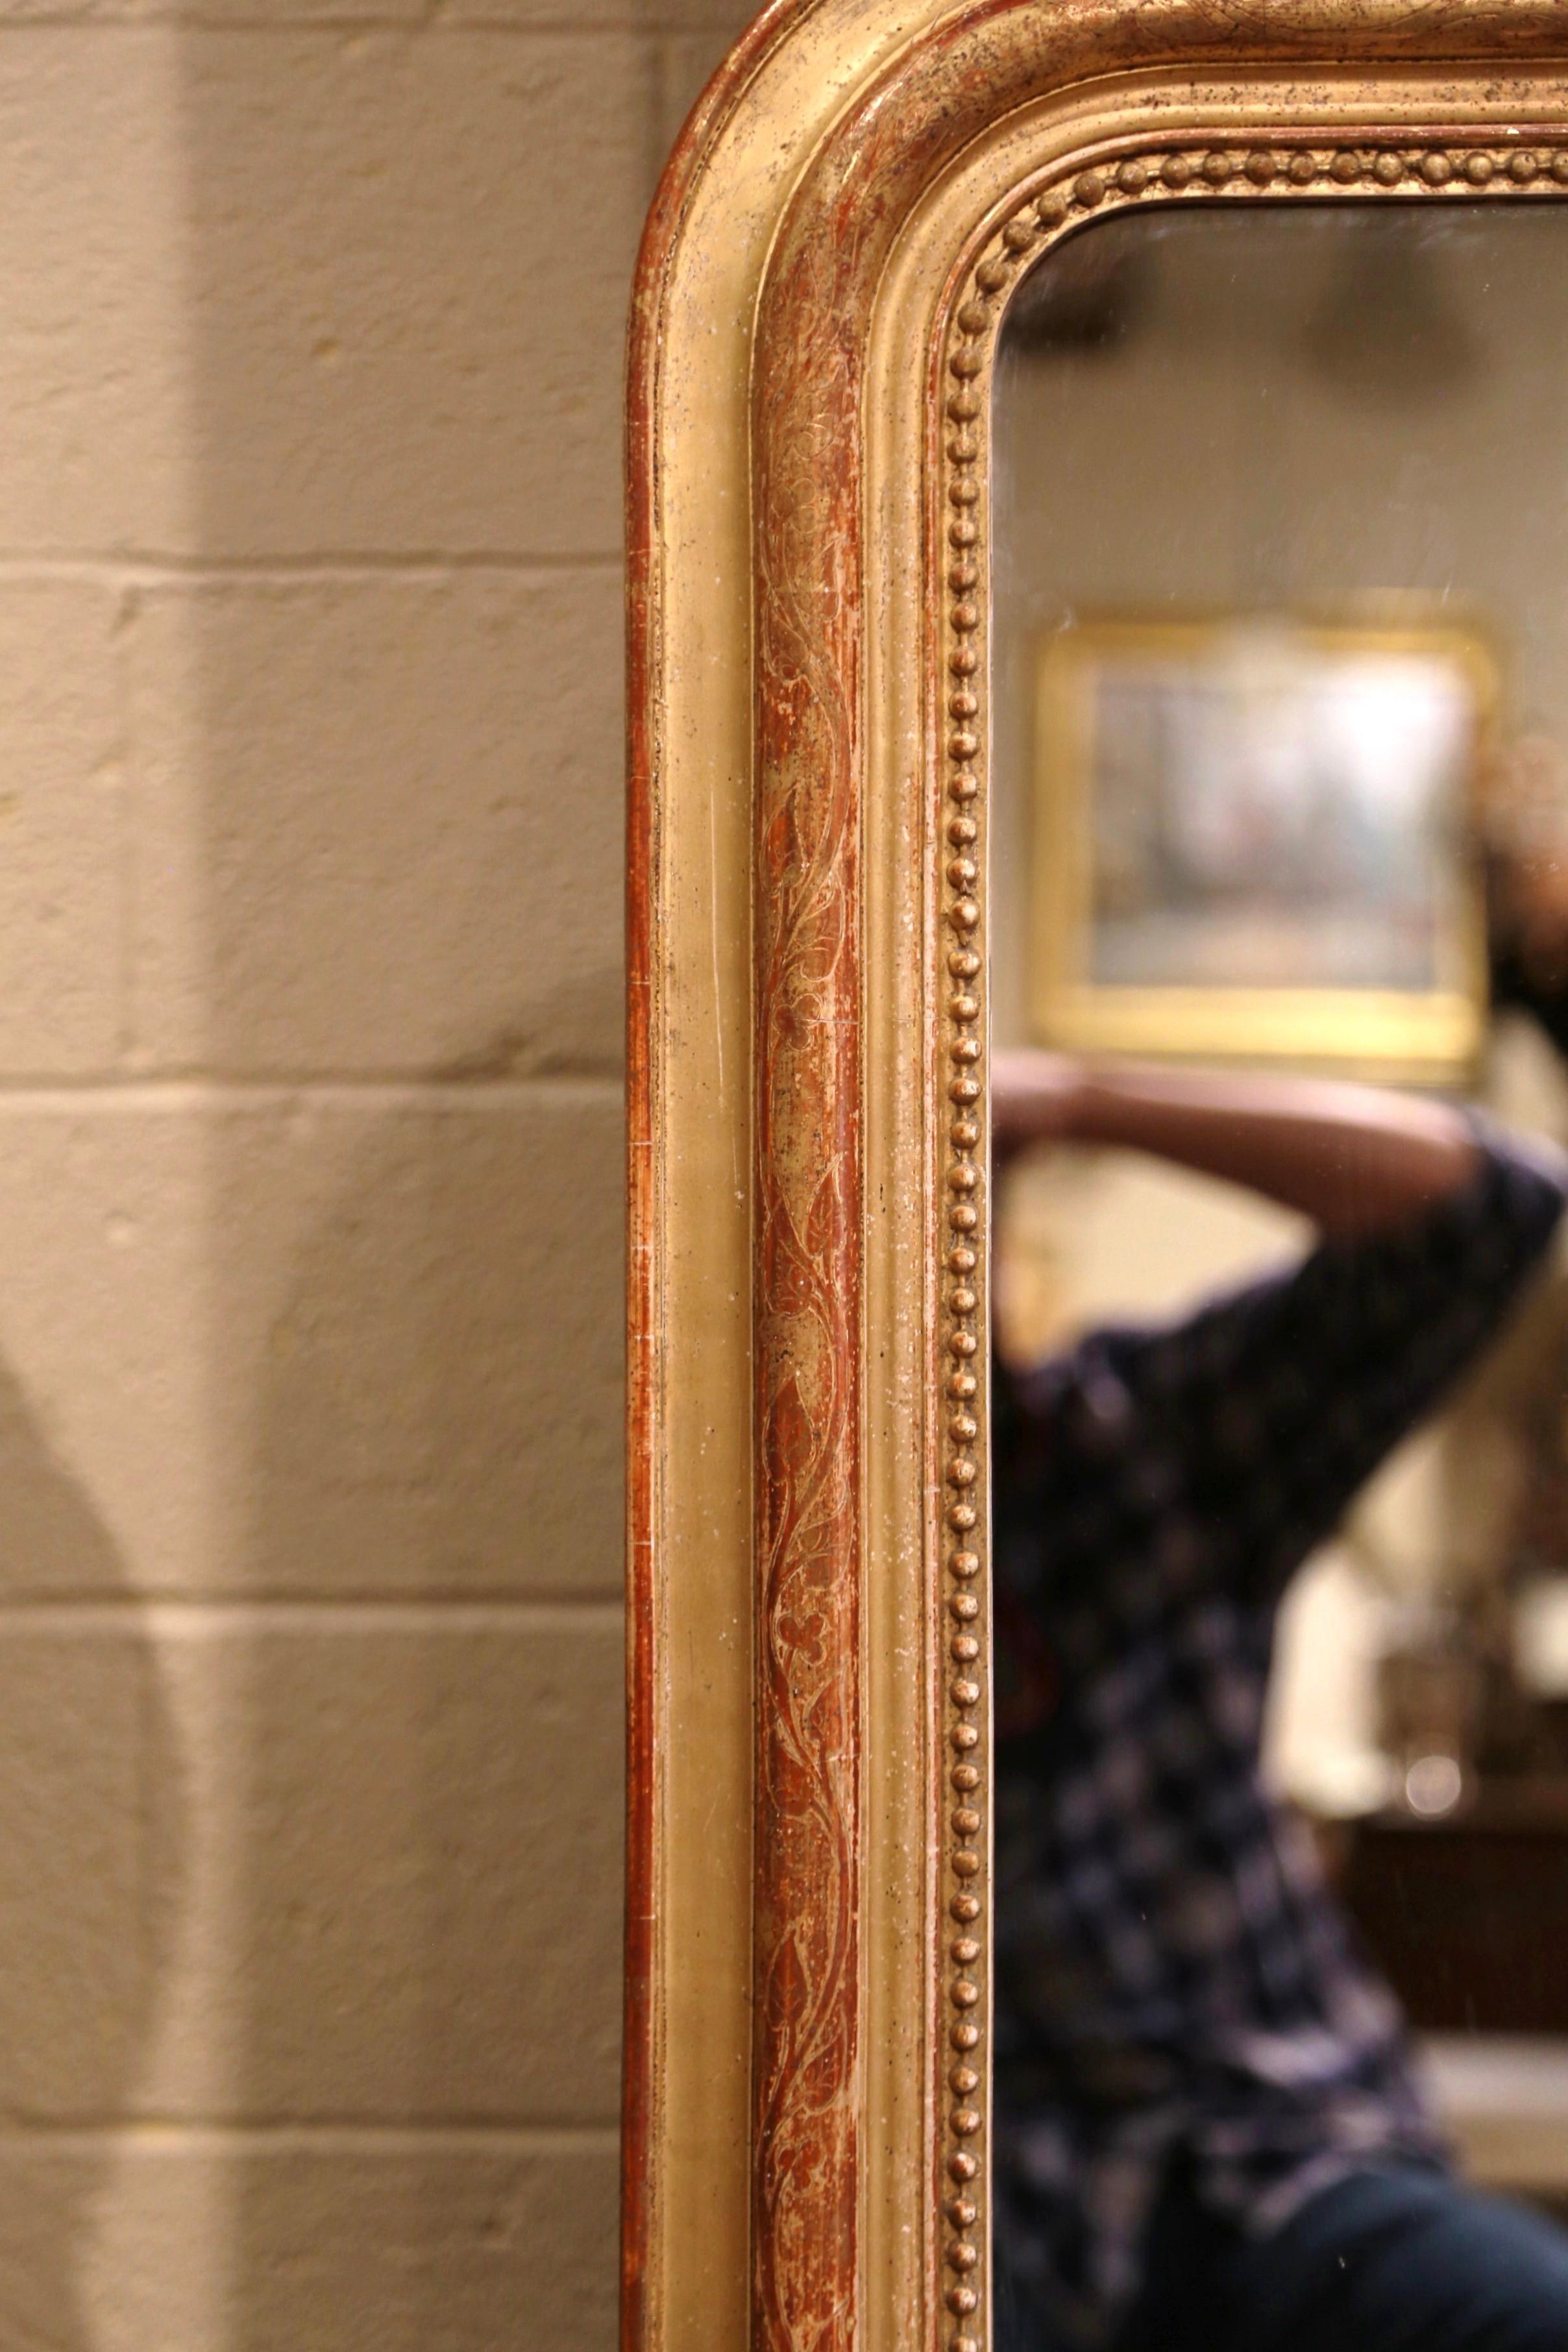 Mercury Glass Mid-19th Century French Louis Philippe Giltwood Mirror with Engraved Decor